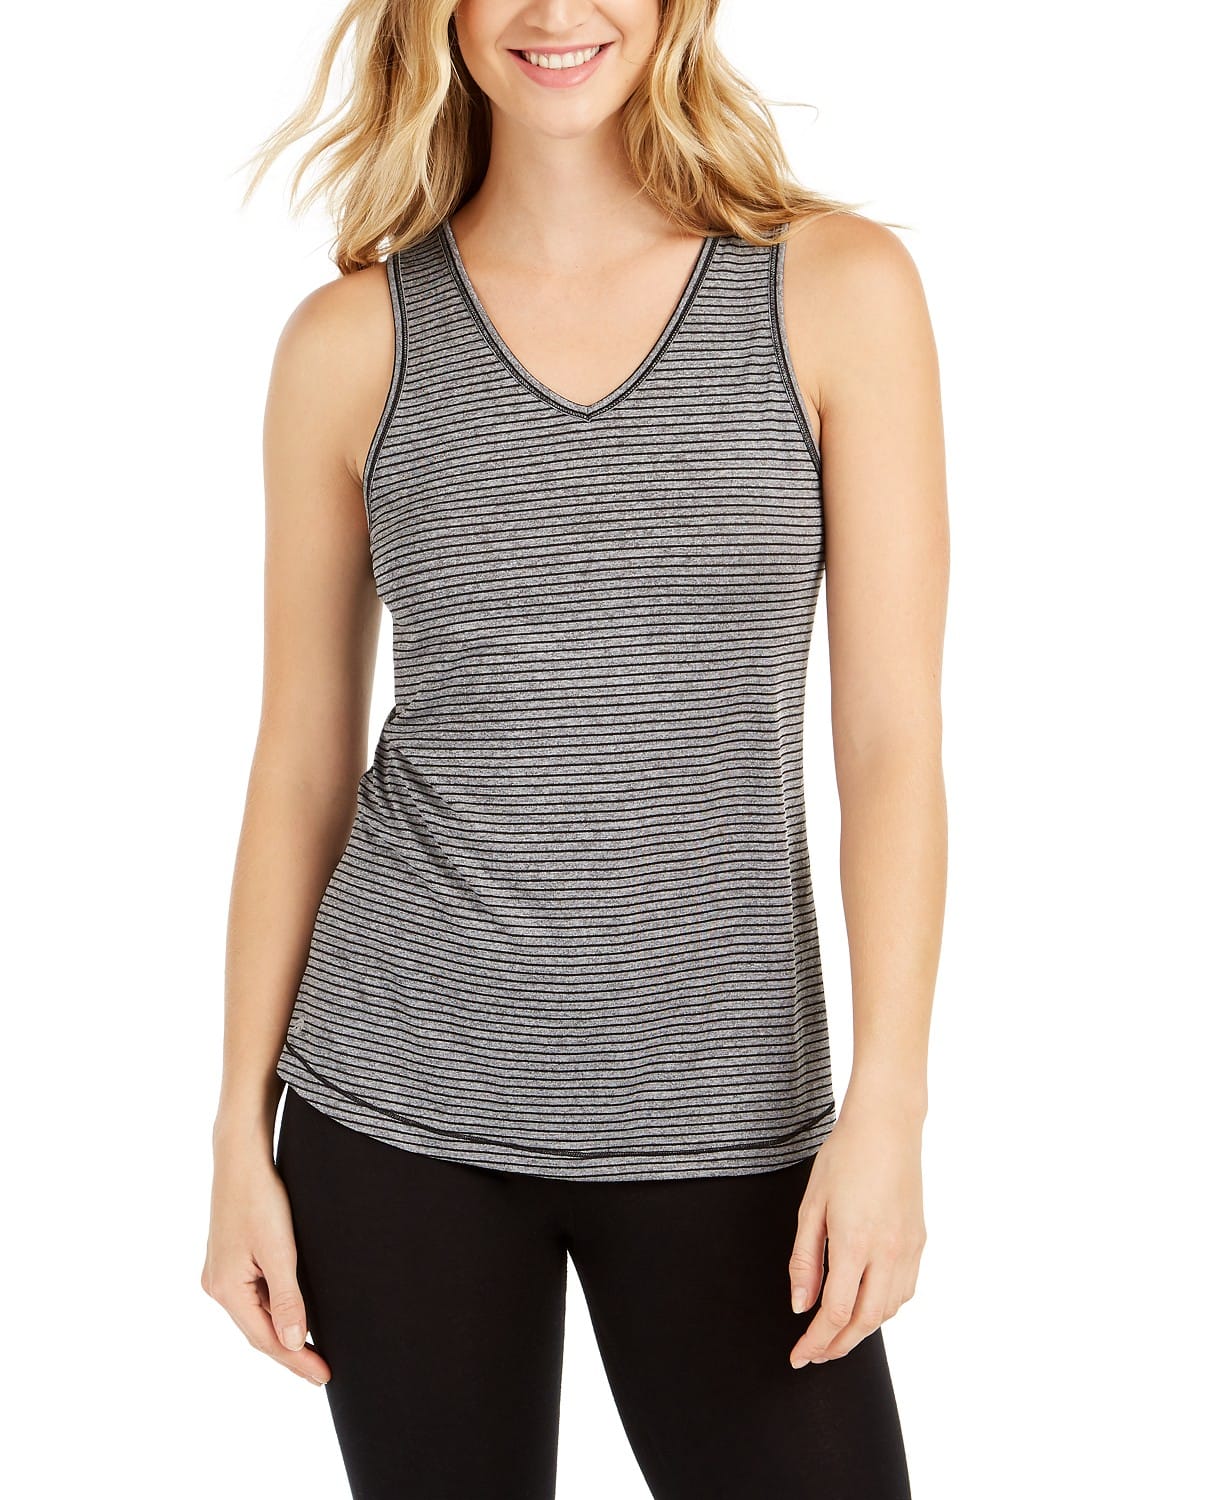 woocommerce-673321-2209615.cloudwaysapps.com-ideology-womens-grey-strappy-back-yoga-tank-top